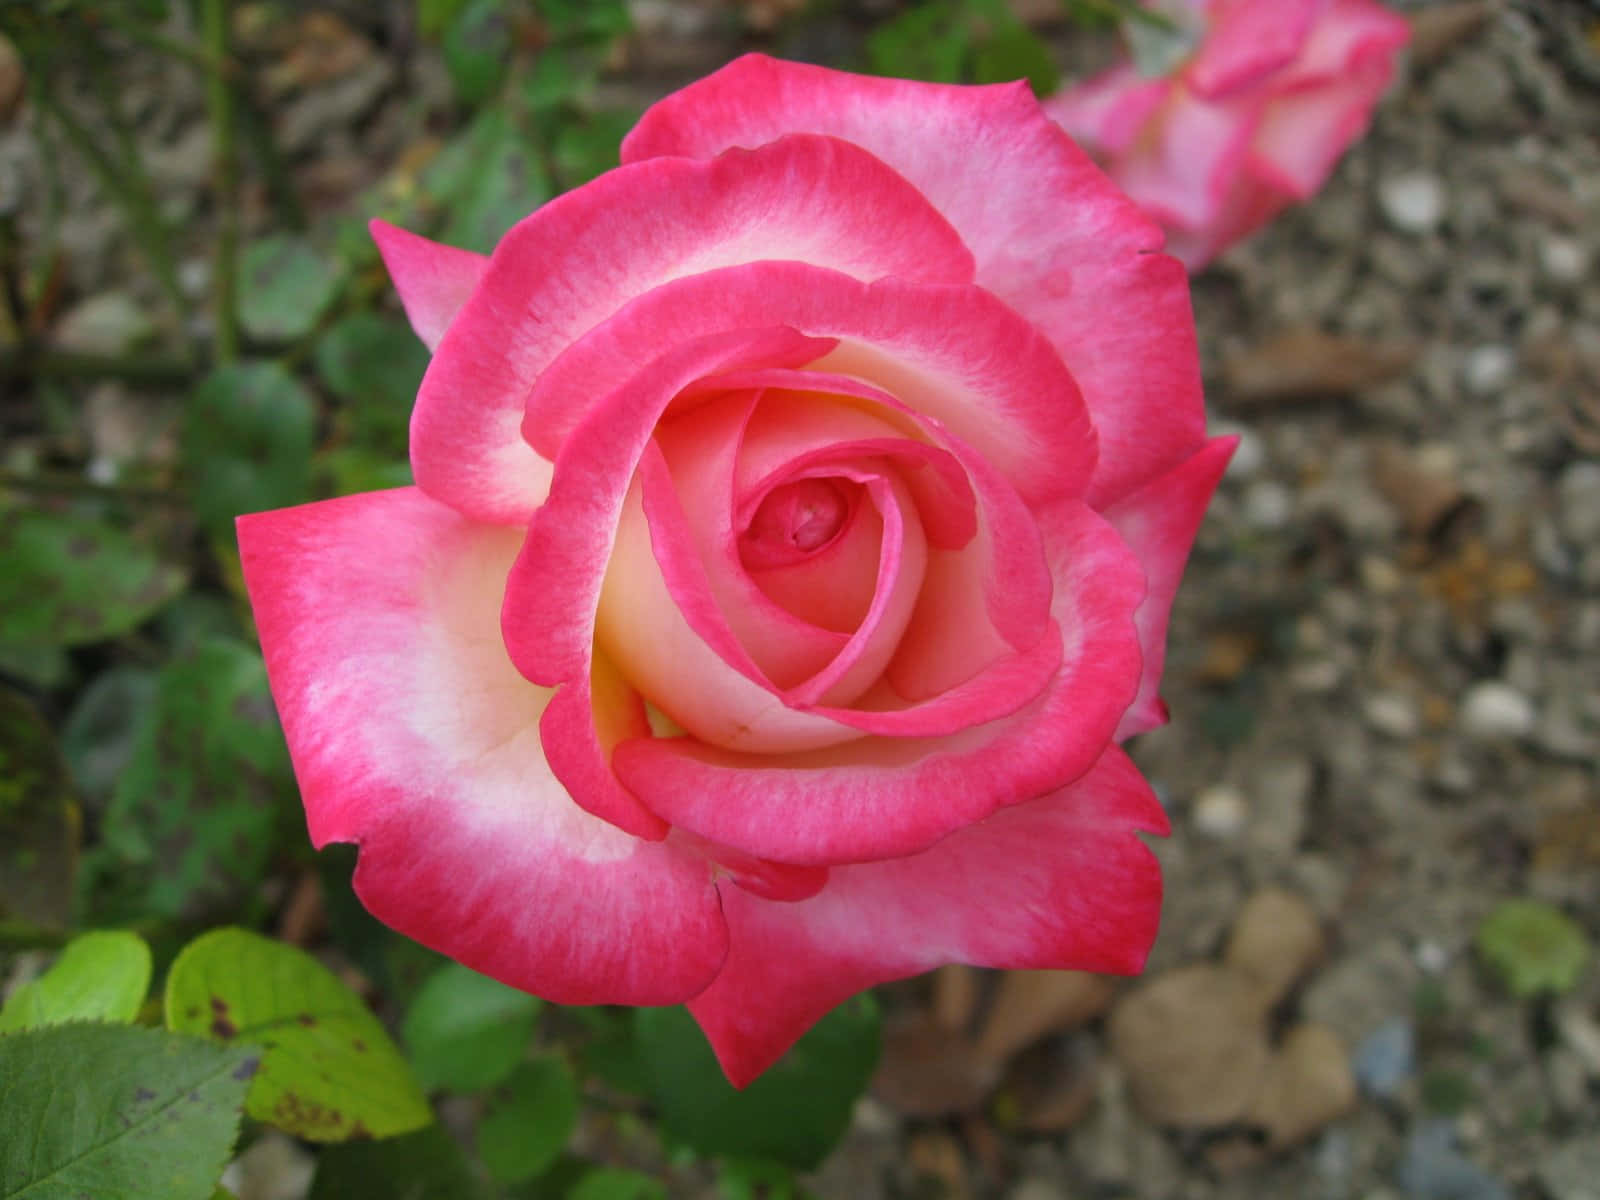 A Bright and Lovely Rose Brightens the Day